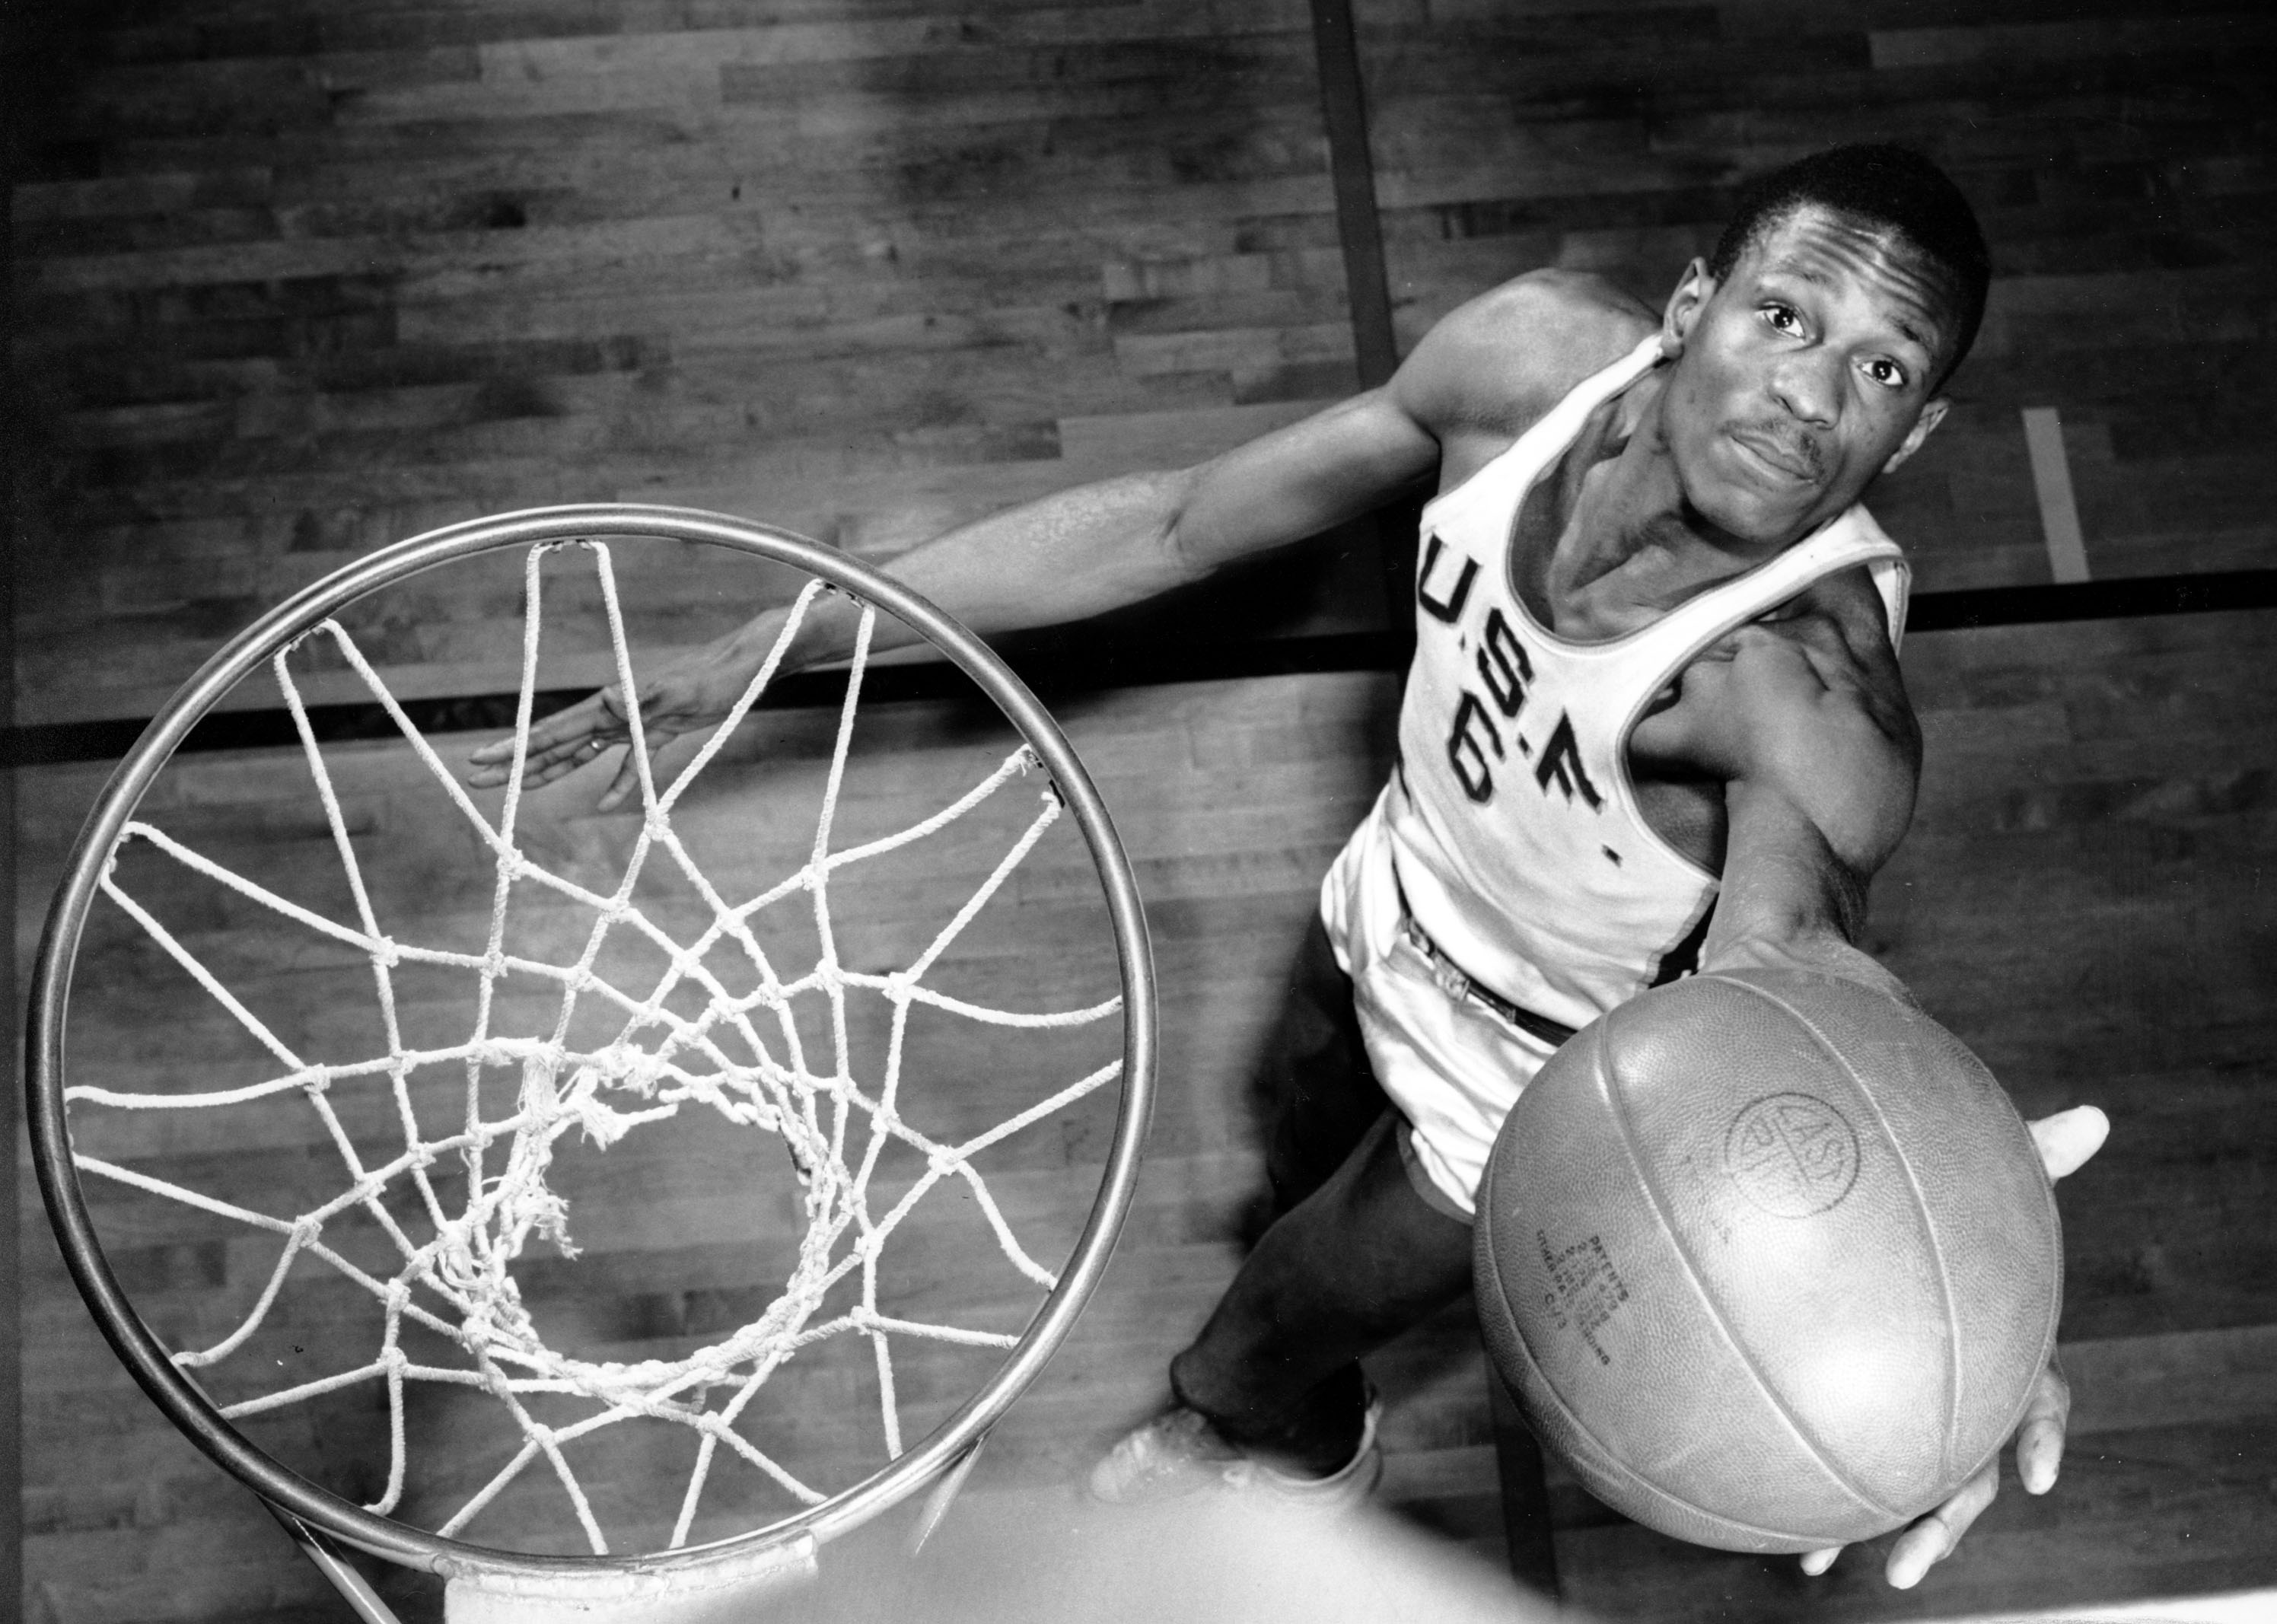 Bill Russell, member of the University of San Francisco basketball team, shows how he scores baskets on Feb. 23, 1956. The 6-foot, 10-inch center, ranked one of the best, has helped his team win 20 straight games during the current season. cr: AP Images/Courtesy of Netflix